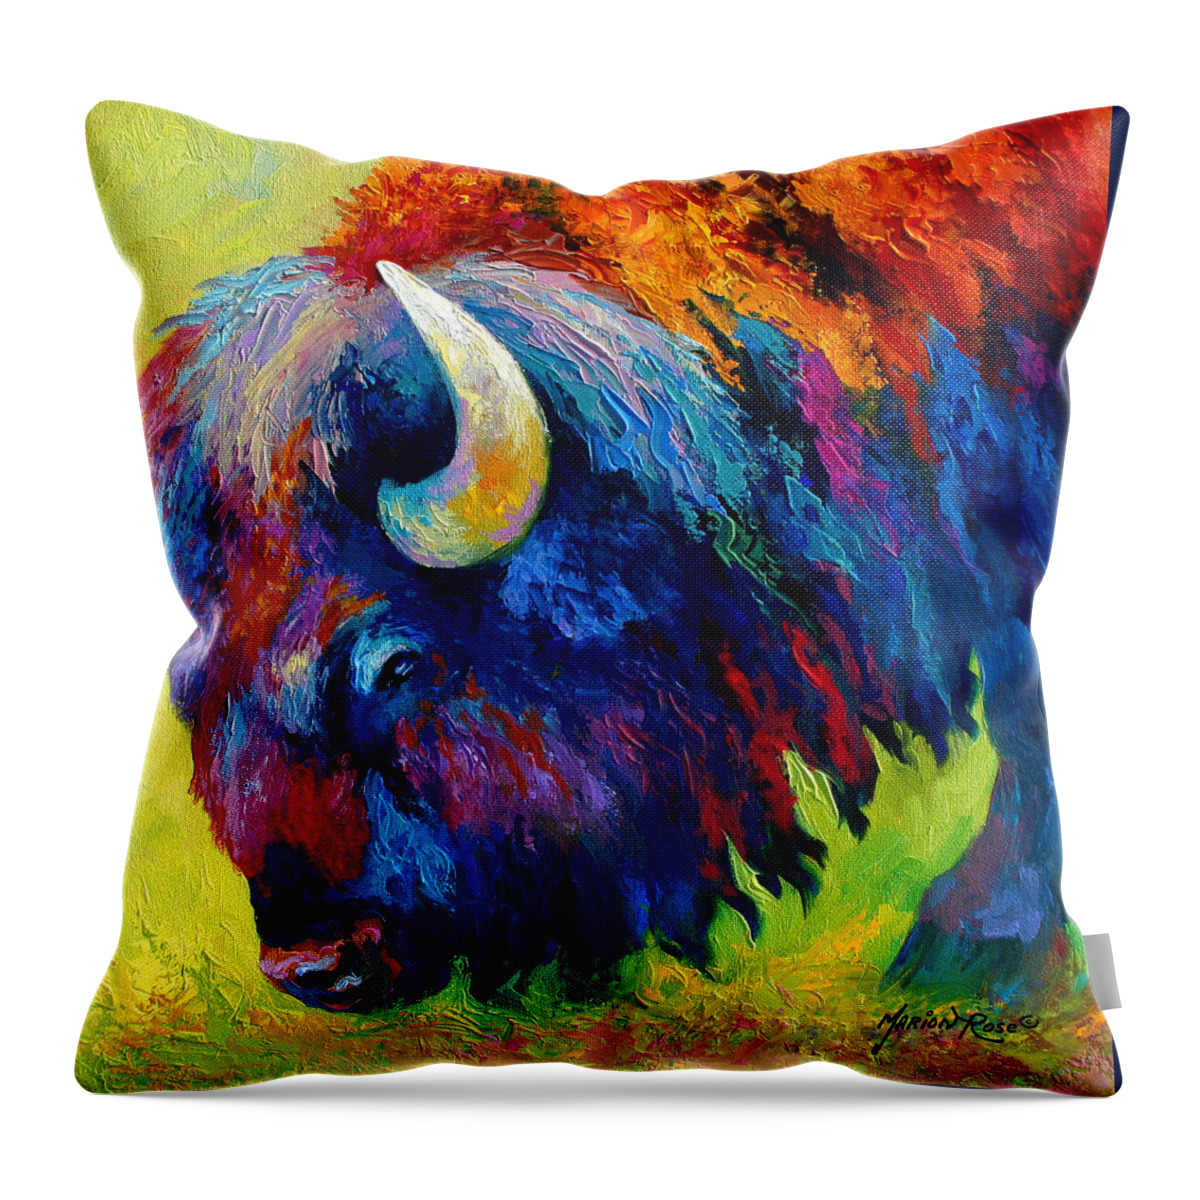 Wildlife Throw Pillow featuring the painting Bison Portrait II by Marion Rose